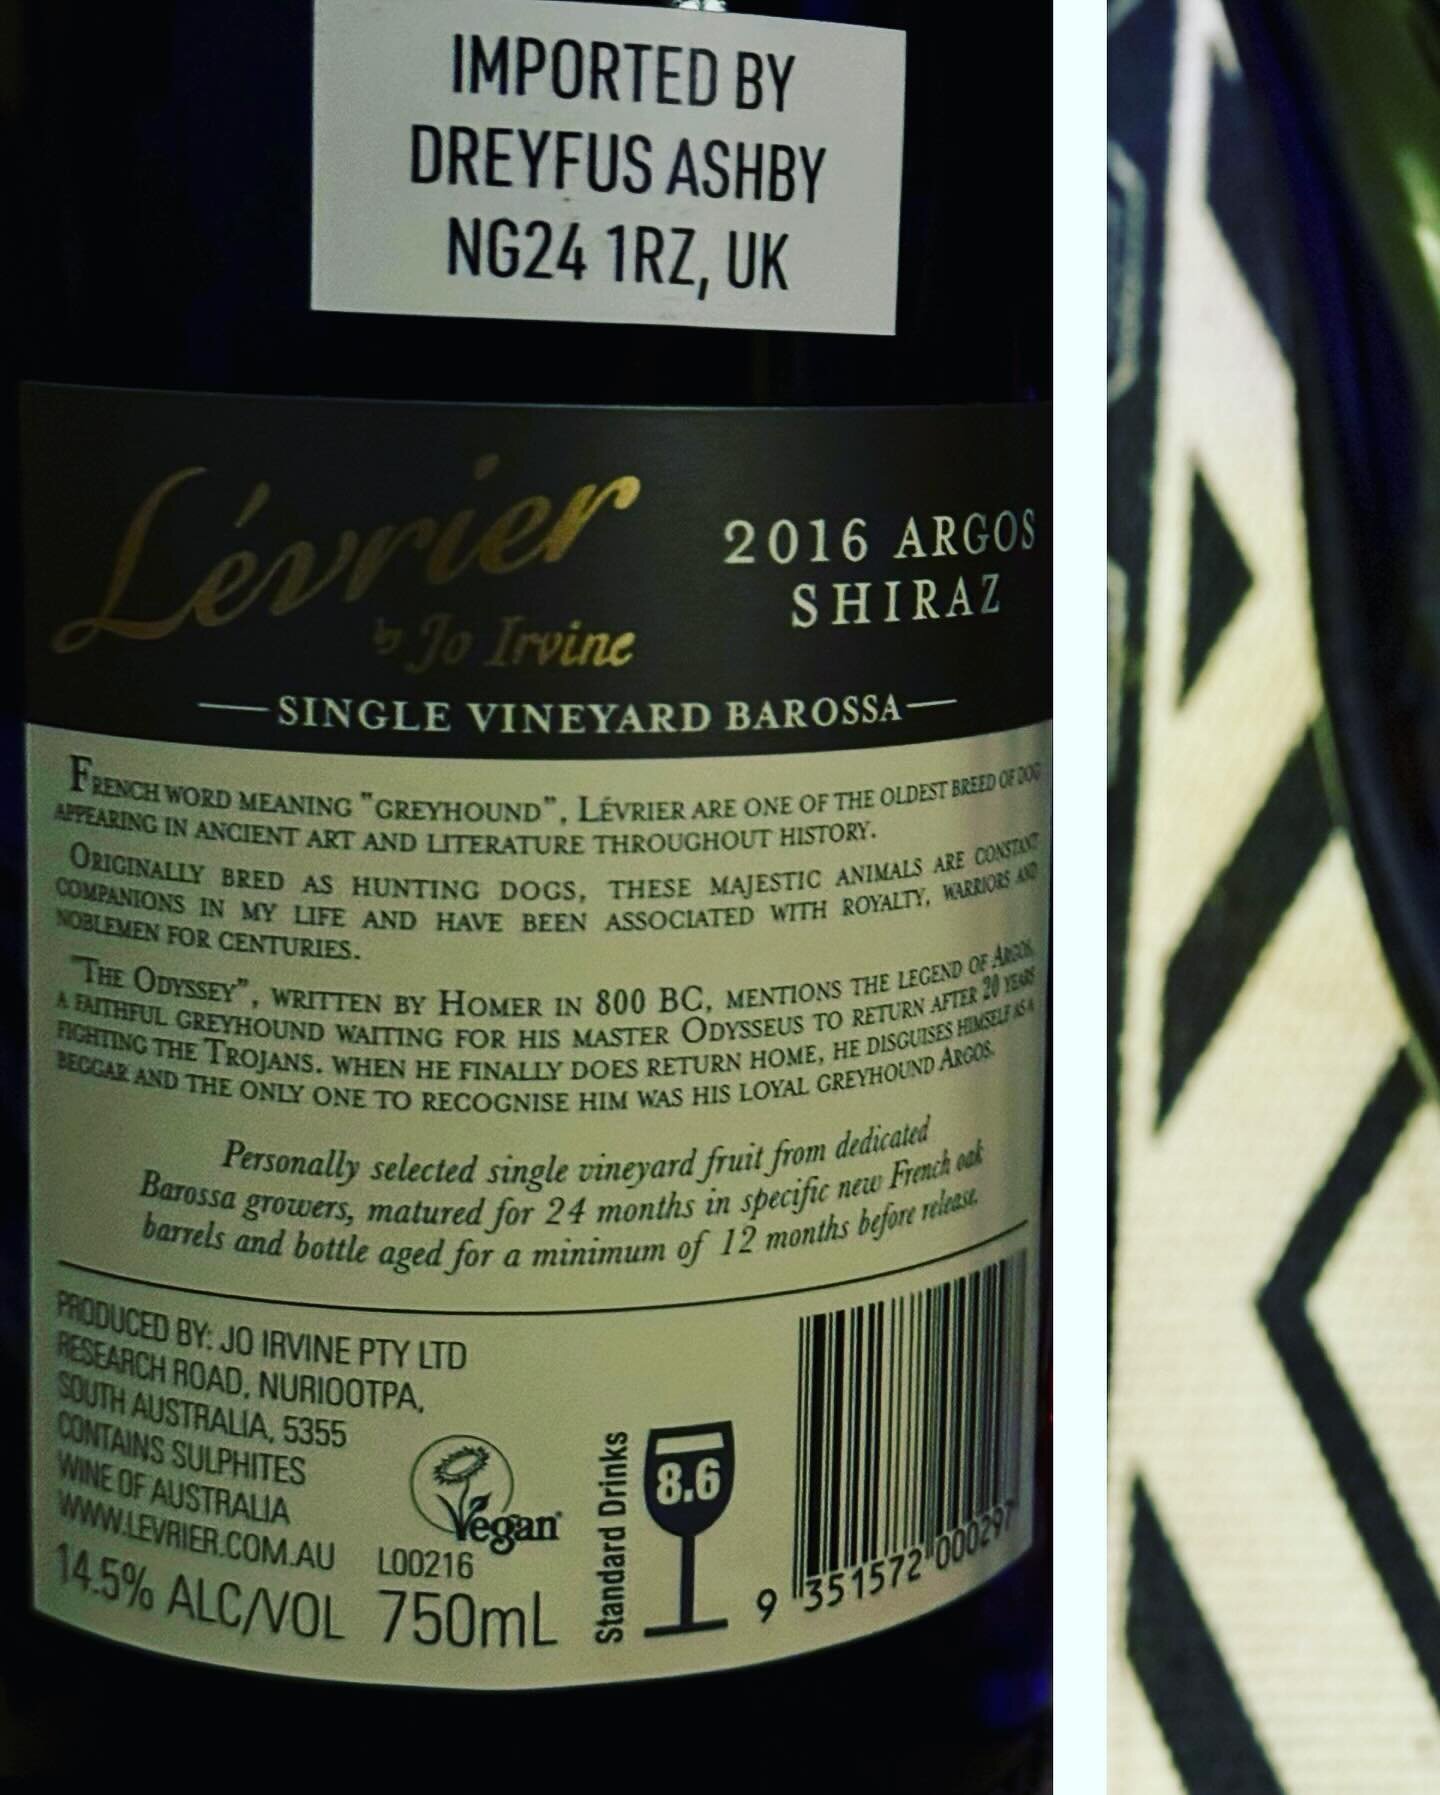 🍷🌟 @levrierwinesbyjoirvine Argos' Shiraz 2016 🌟🍷

Aussie Shiraz, but Cooler. 

Australia's wine story is incomplete without Shiraz. In Eden Valley, this story takes an interesting twist. Next to Barossa Valley, Eden Valley is famed for its Riesli